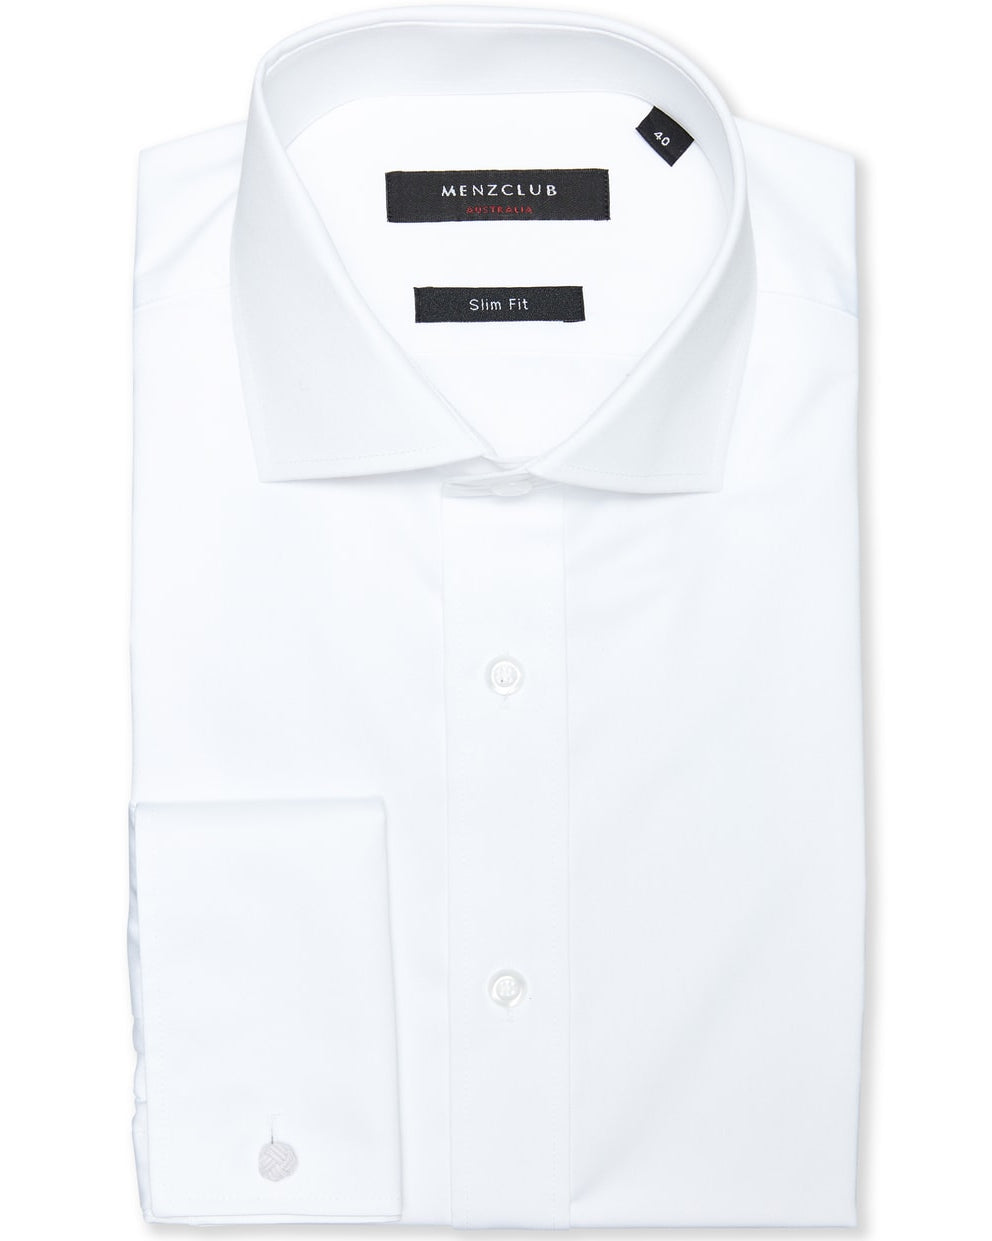 Allendale French Cuff Shirt - Men's Formal Shirts at Menzclub